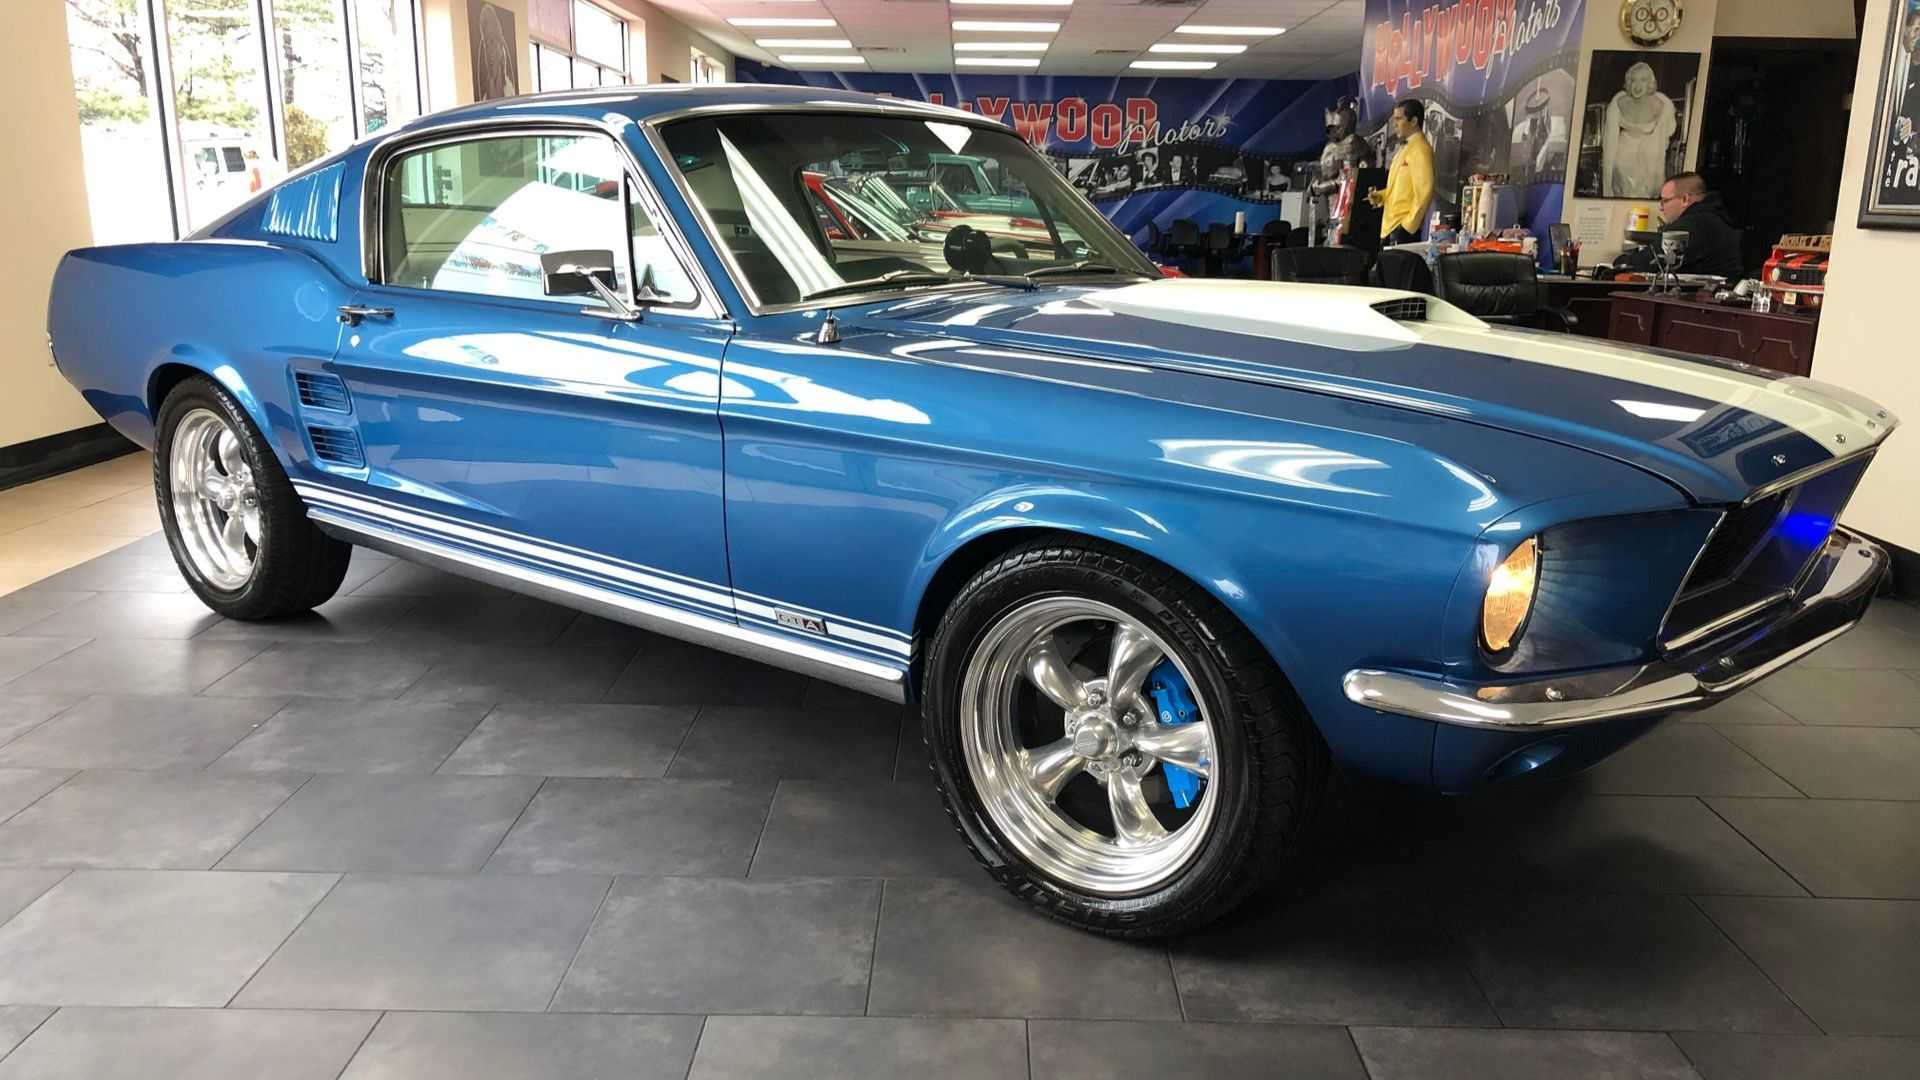 08e3d2451b91f155a44fcbbed77cb99e The 1968 Ford Mustang has been transformed into a jaw-dropping masterpiece.